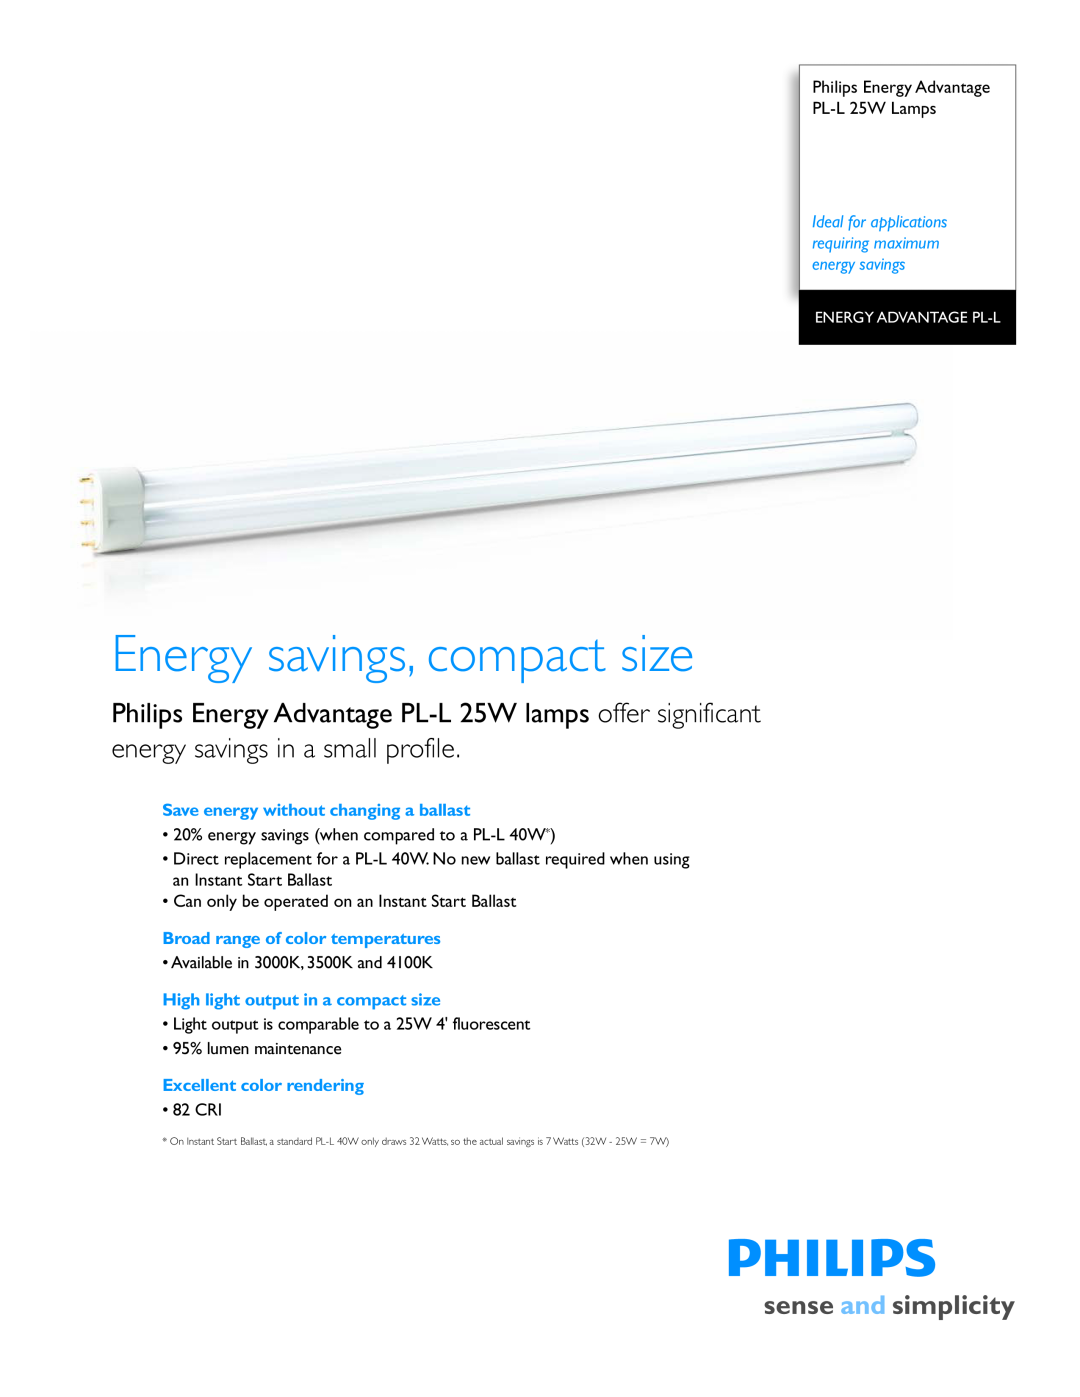 Philips PL-L 25W manual Energy savings, compact size, energy savings in a small profile, Broad range of color temperatures 